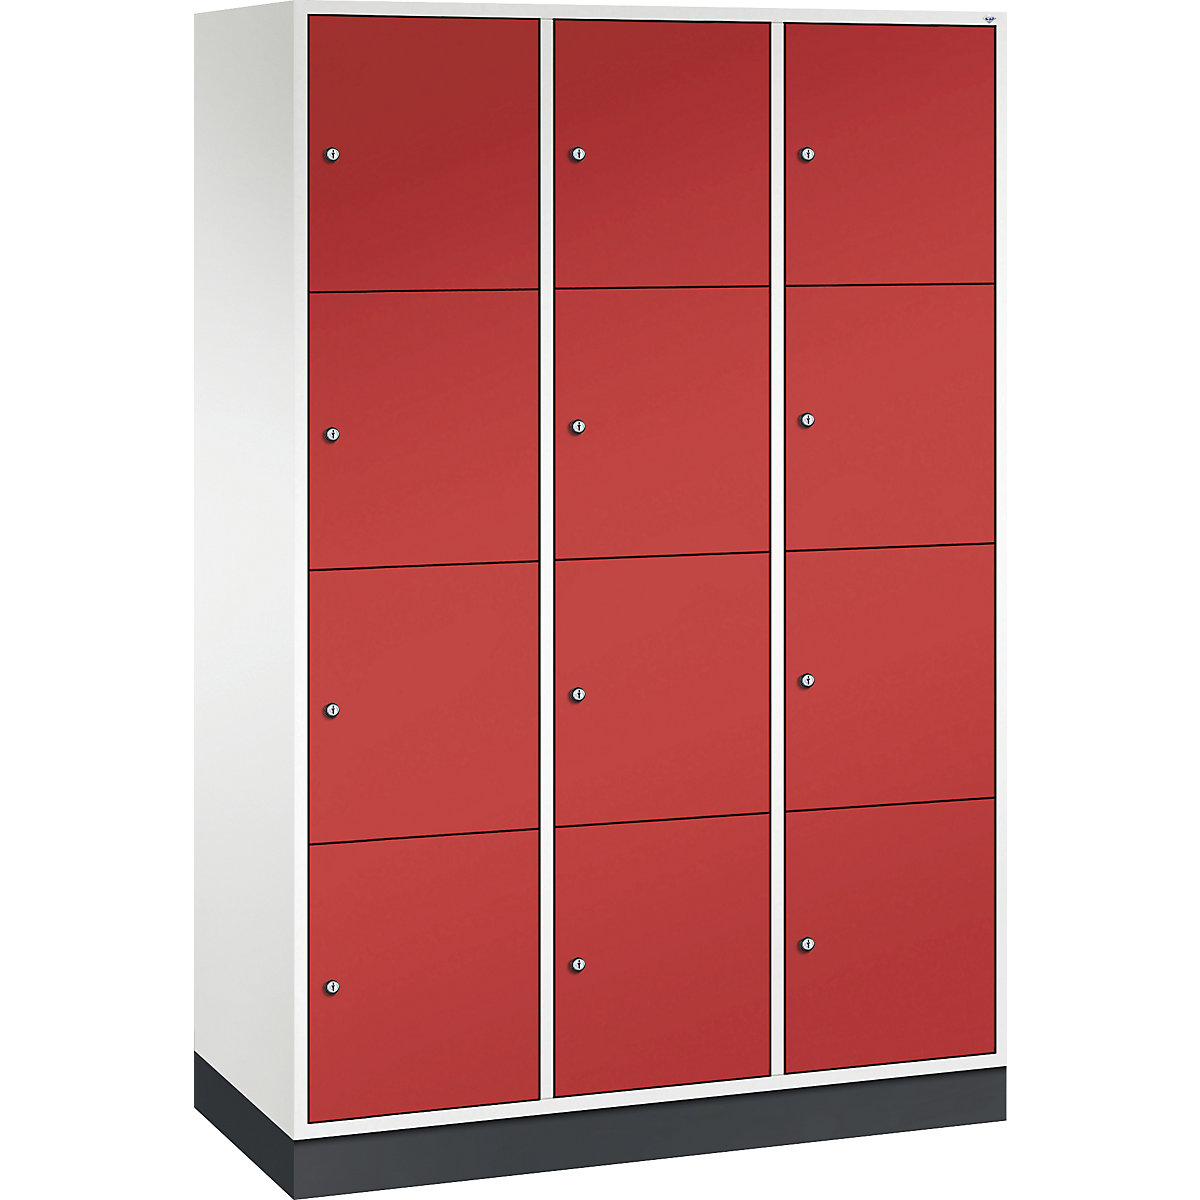 INTRO steel compartment locker, compartment height 435 mm – C+P, WxD 1220 x 500 mm, 12 compartments, pure white body, flame red doors